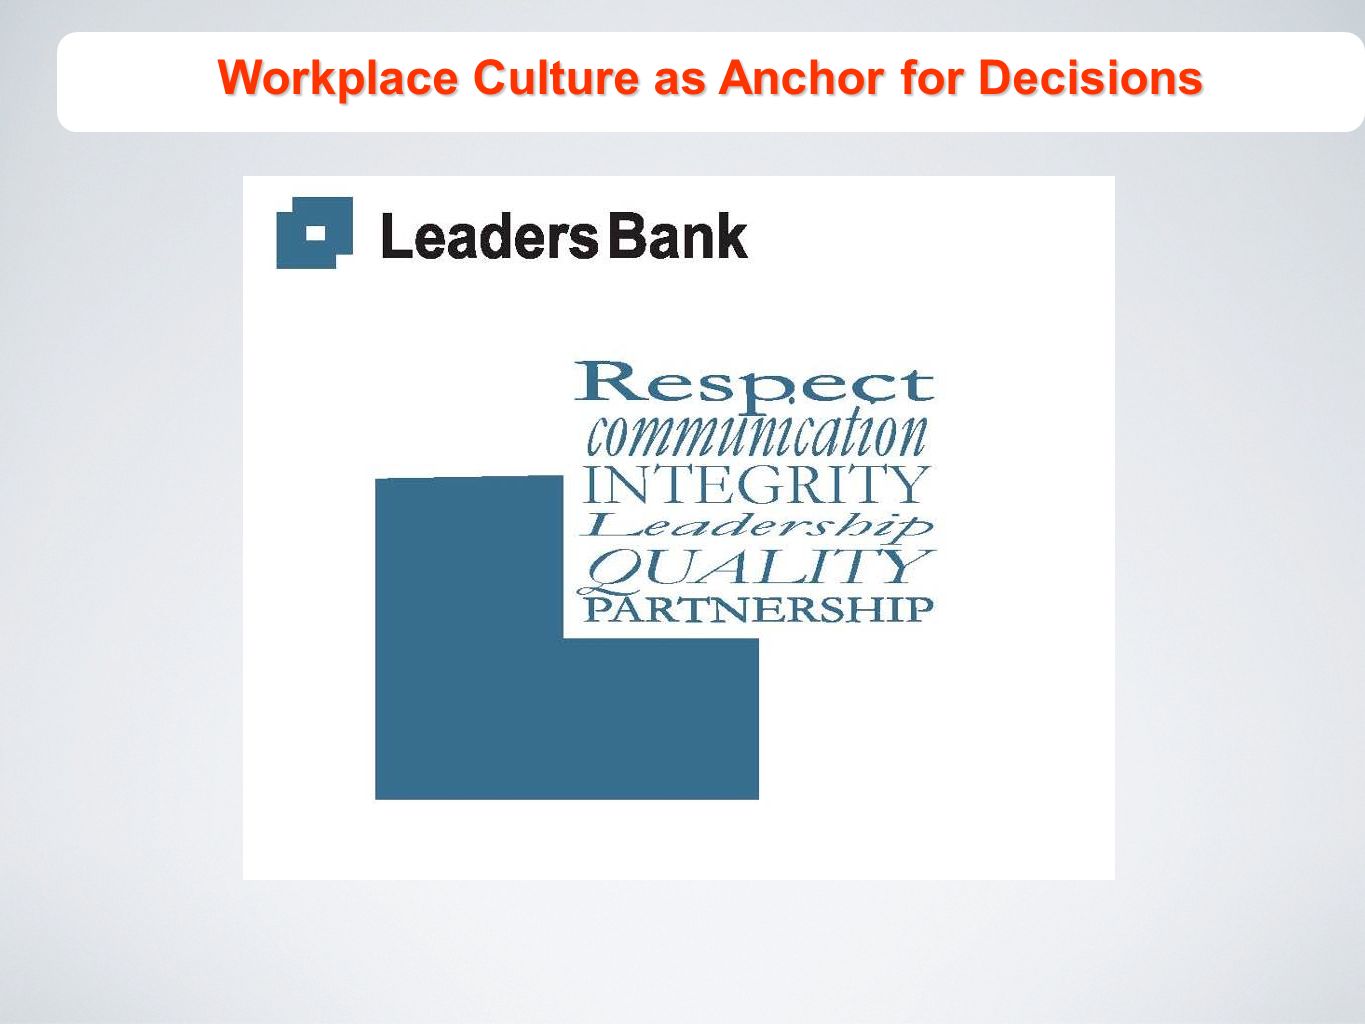 Workplace Culture as Anchor for Decisions